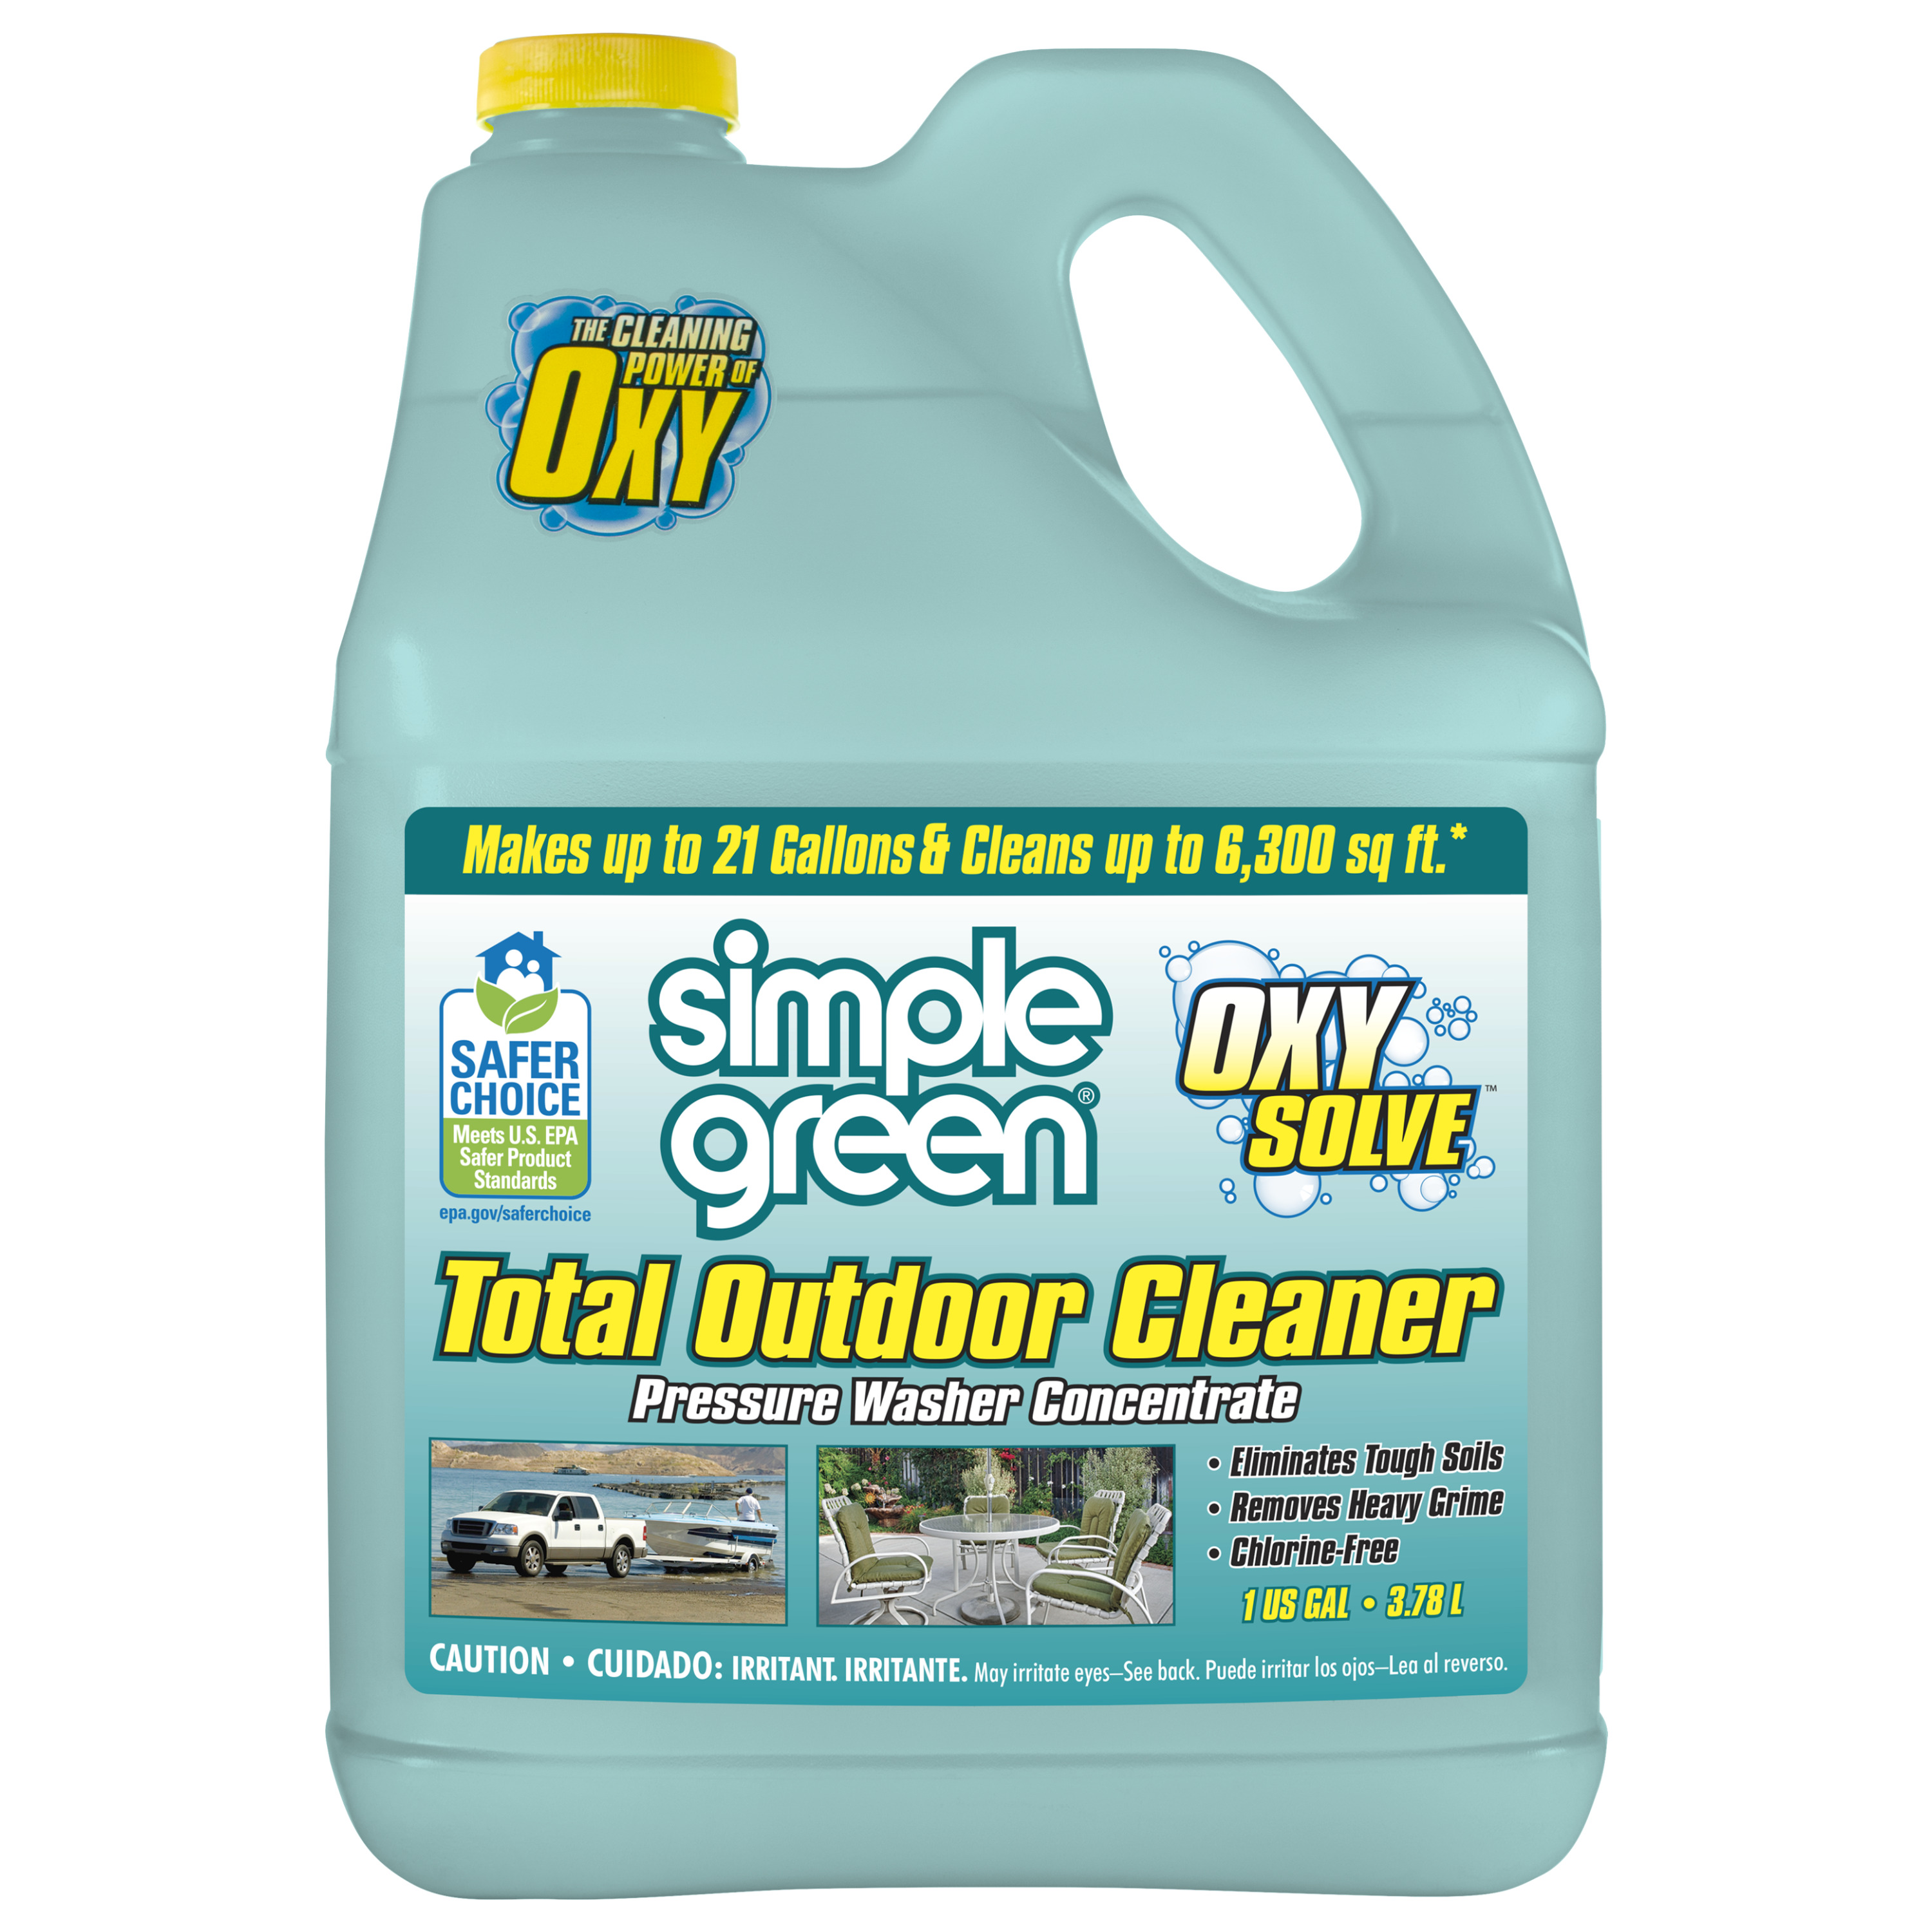 Simple Green Oxy Solve Total Outdoor Pressure Washer Concentrate - image 1 of 8